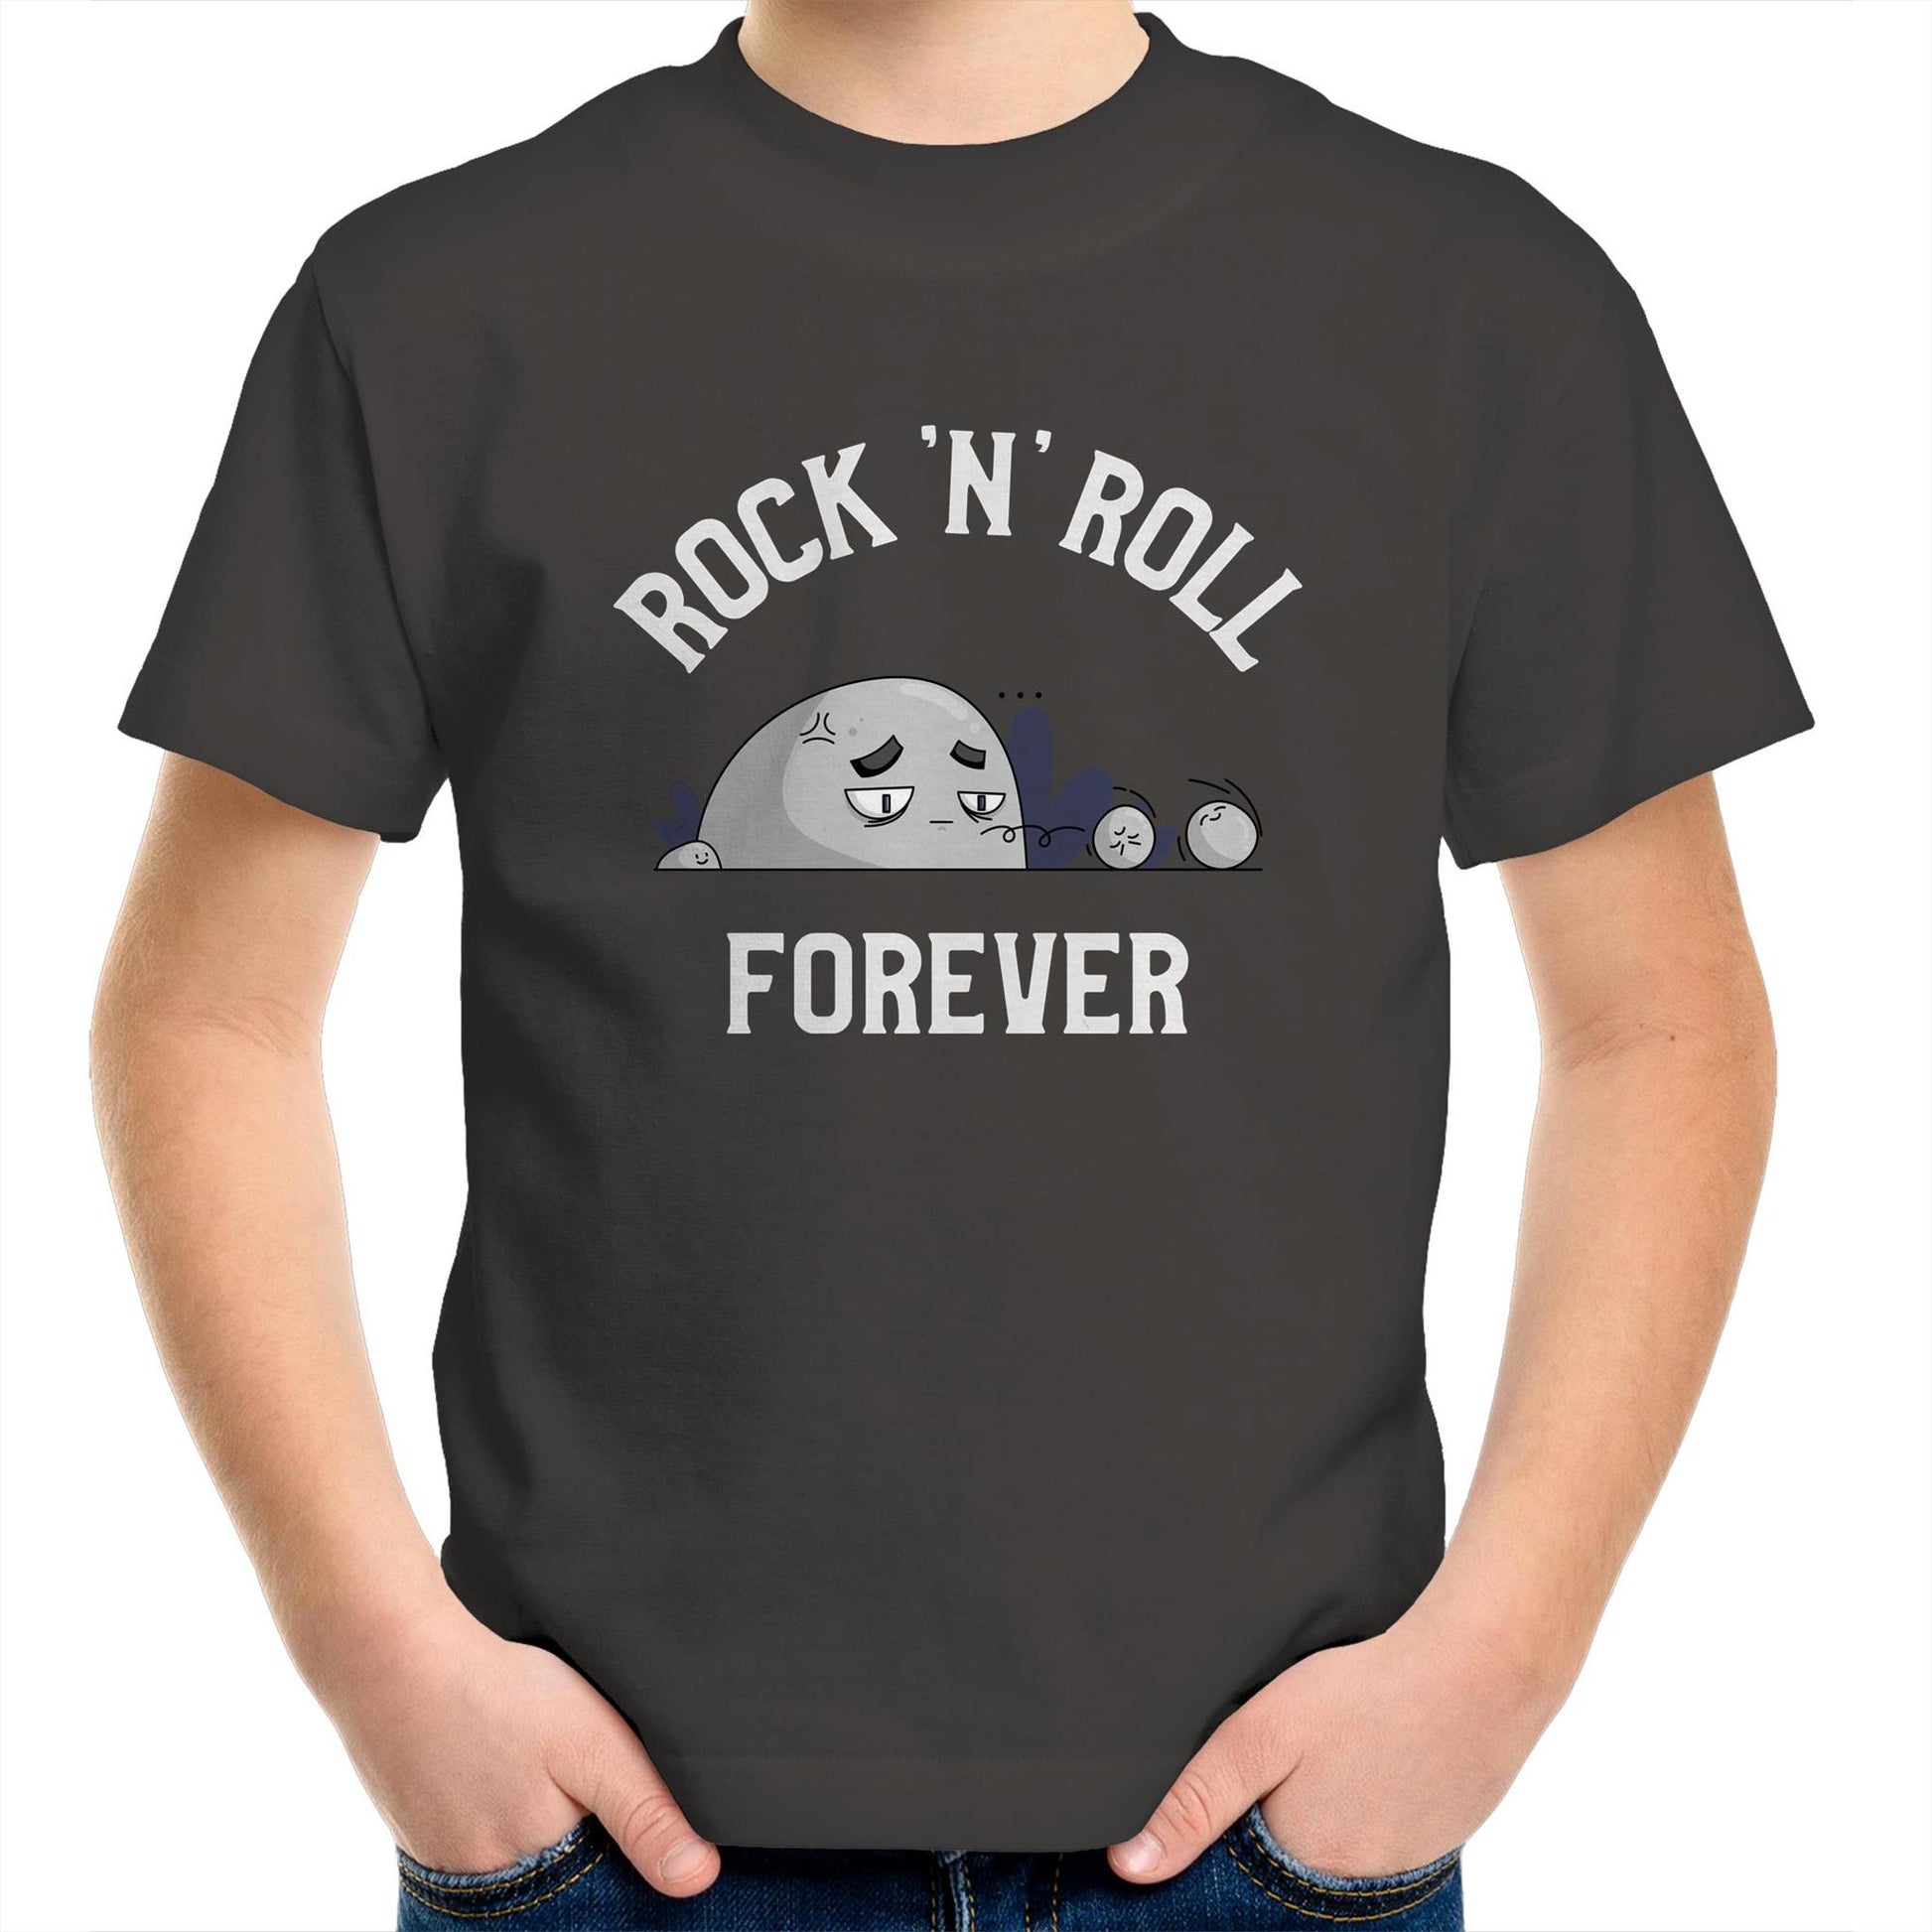 Rock 'N' Roll Forever - Kids Youth T-Shirt Charcoal Kids Youth T-shirt Music